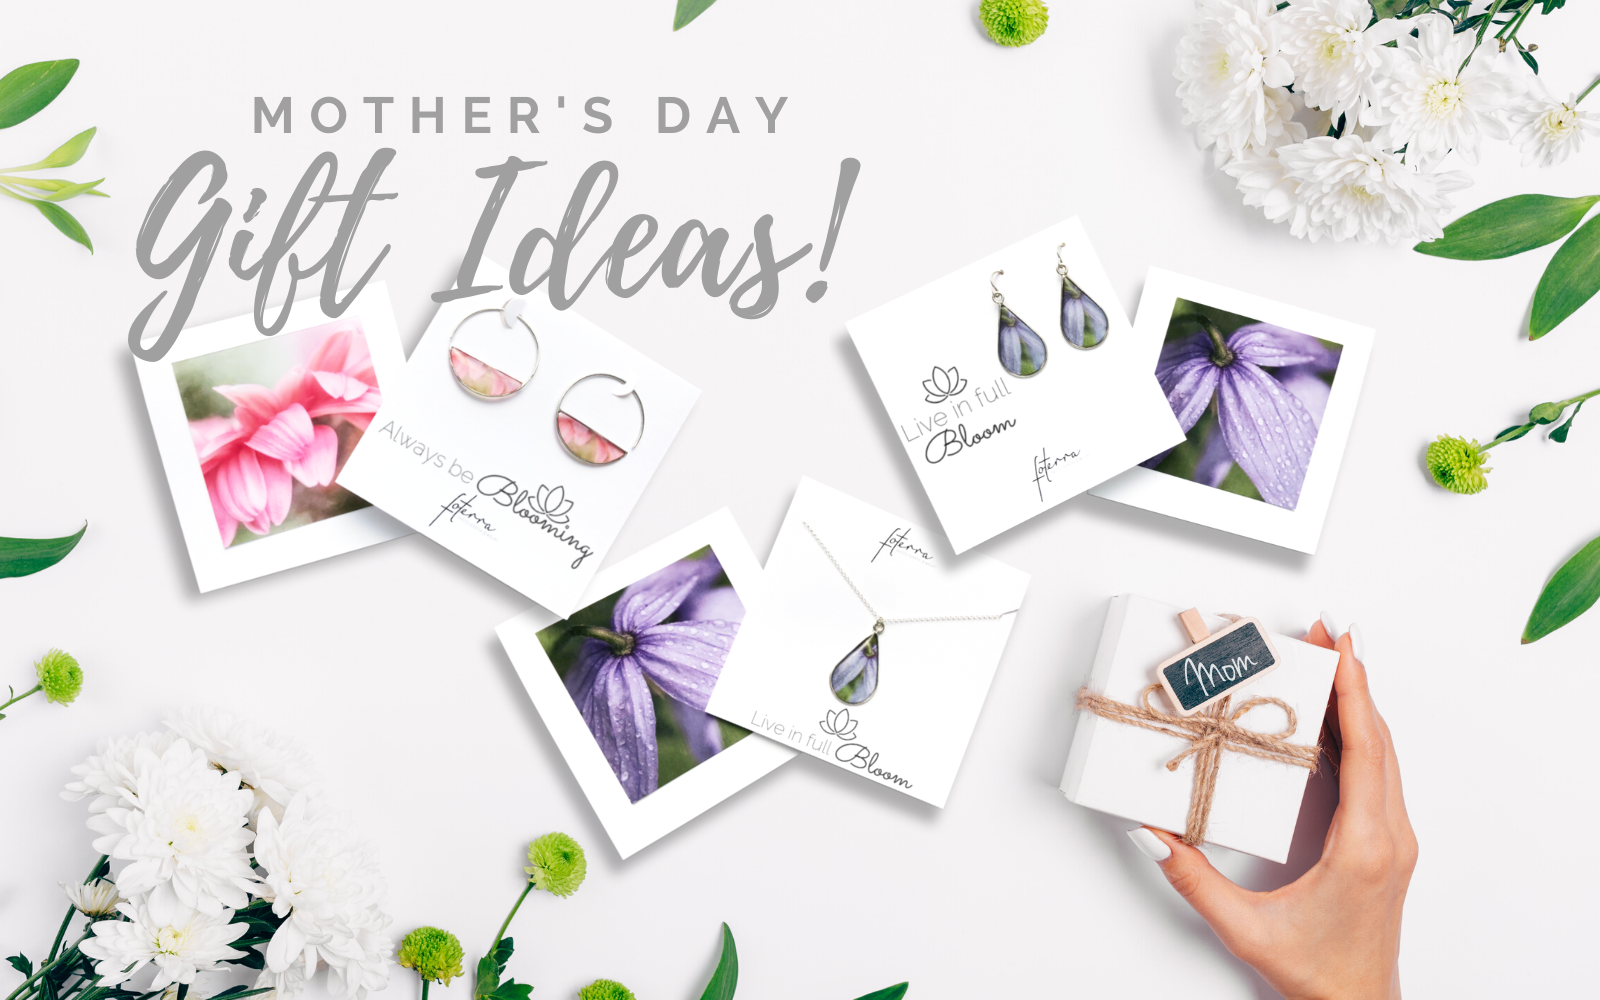 Our Favorite Photo Gifts for Mom